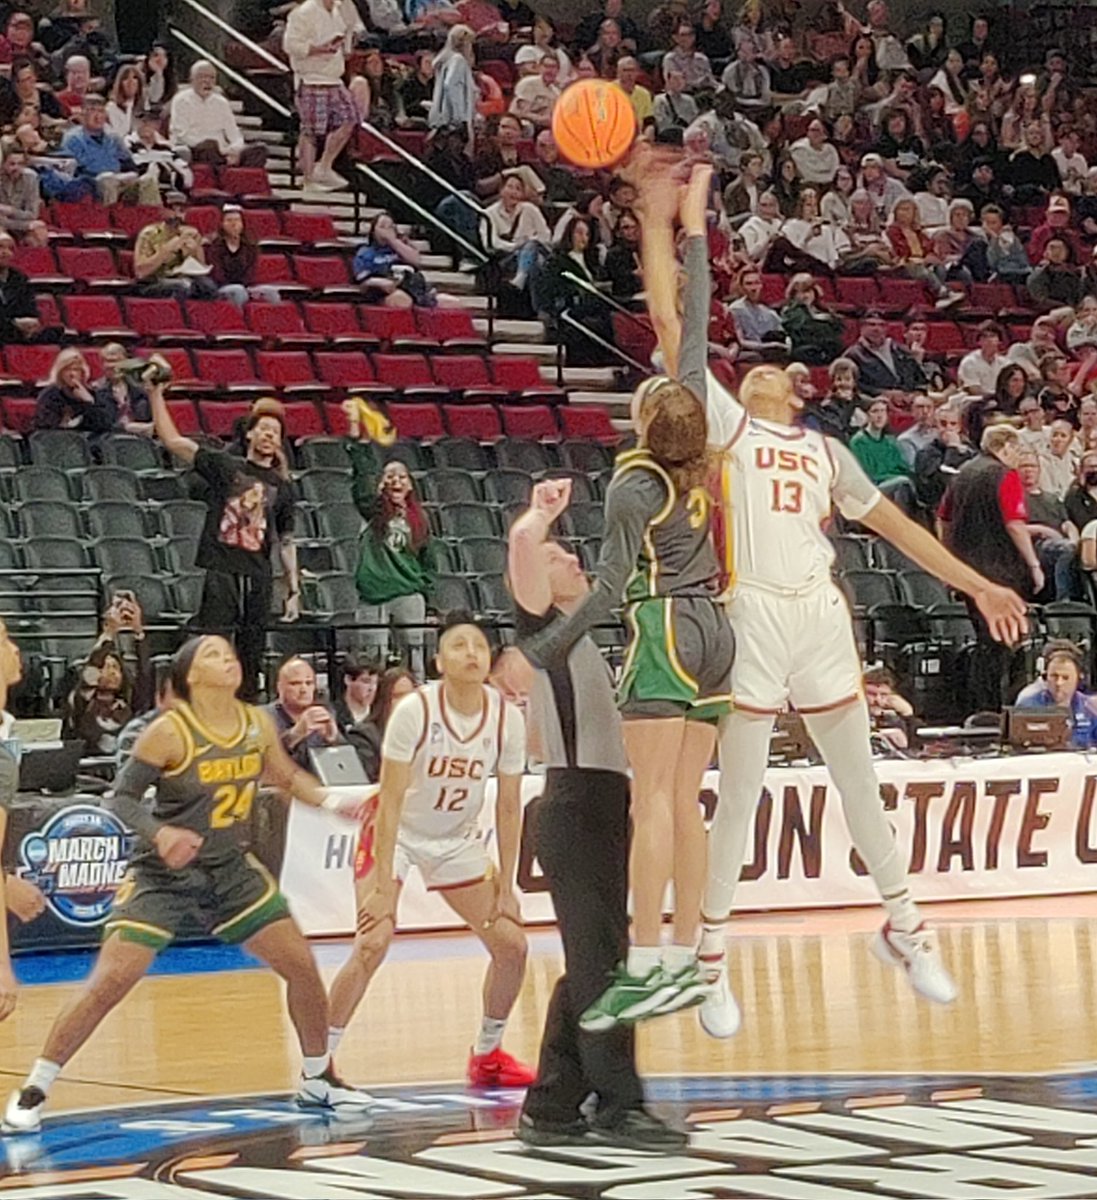 USC defeated Baylor 74-70 in the #Sweet16 in Portland in a closely contested game to advance to the regional finals JuJu Watkins didn't have her most efficient game, shooting 8-of-28 (2-of-11 on 3s), but converted a 3-point play to break a late tie. She scored 9 straight points…